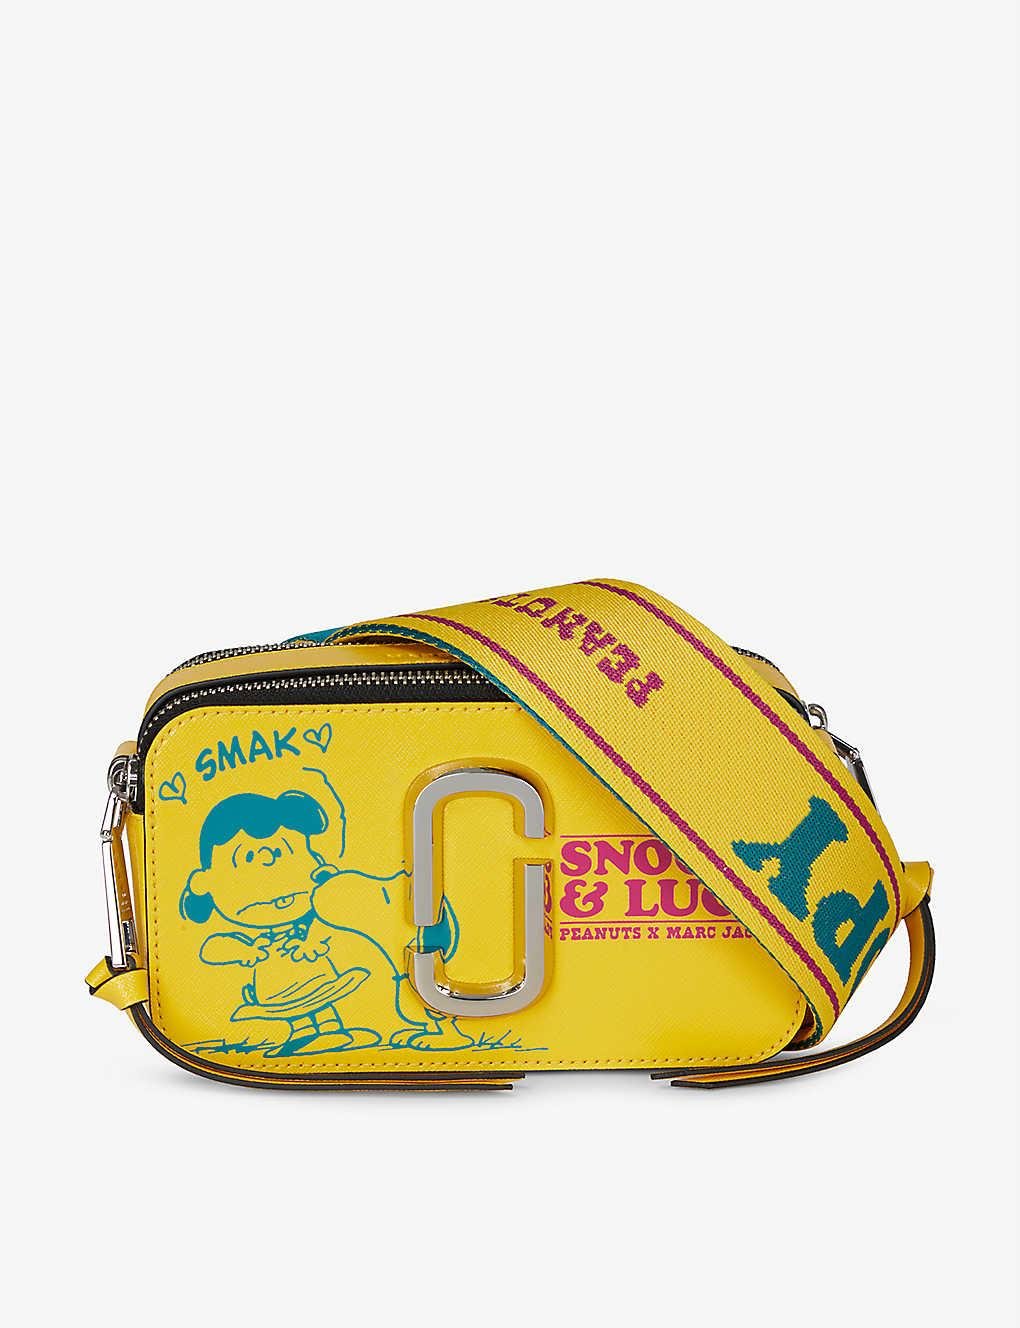 Marc Jacobs X Peanuts Snapshot Snoopy And Lucy Print Leather Cross-body Bag  in Yellow | Lyst